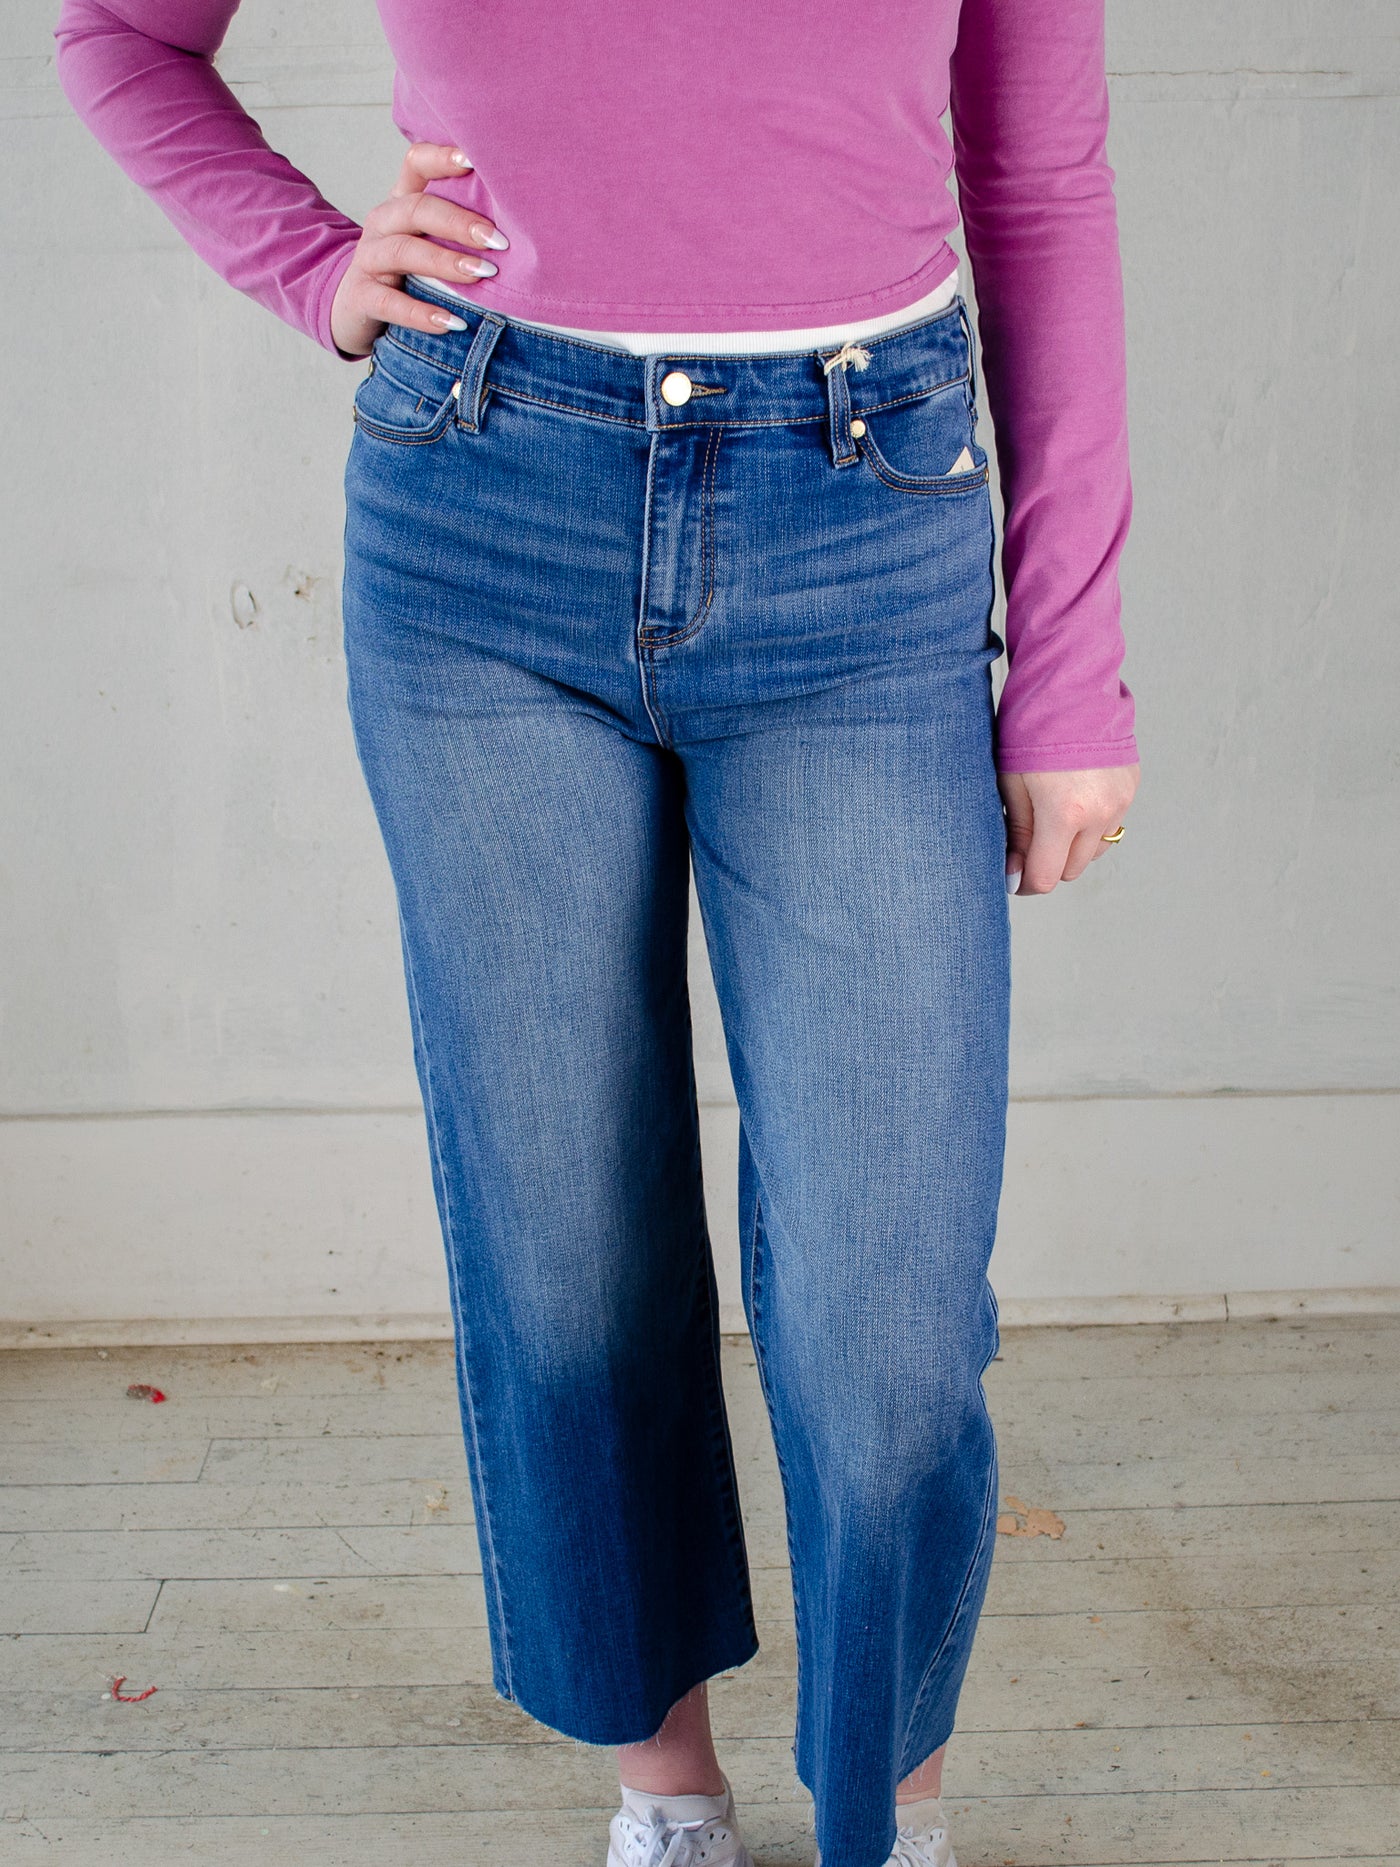 Model wearing The Essential Blue Jeans with a purple cropped quarter zip and white tennis shoes.